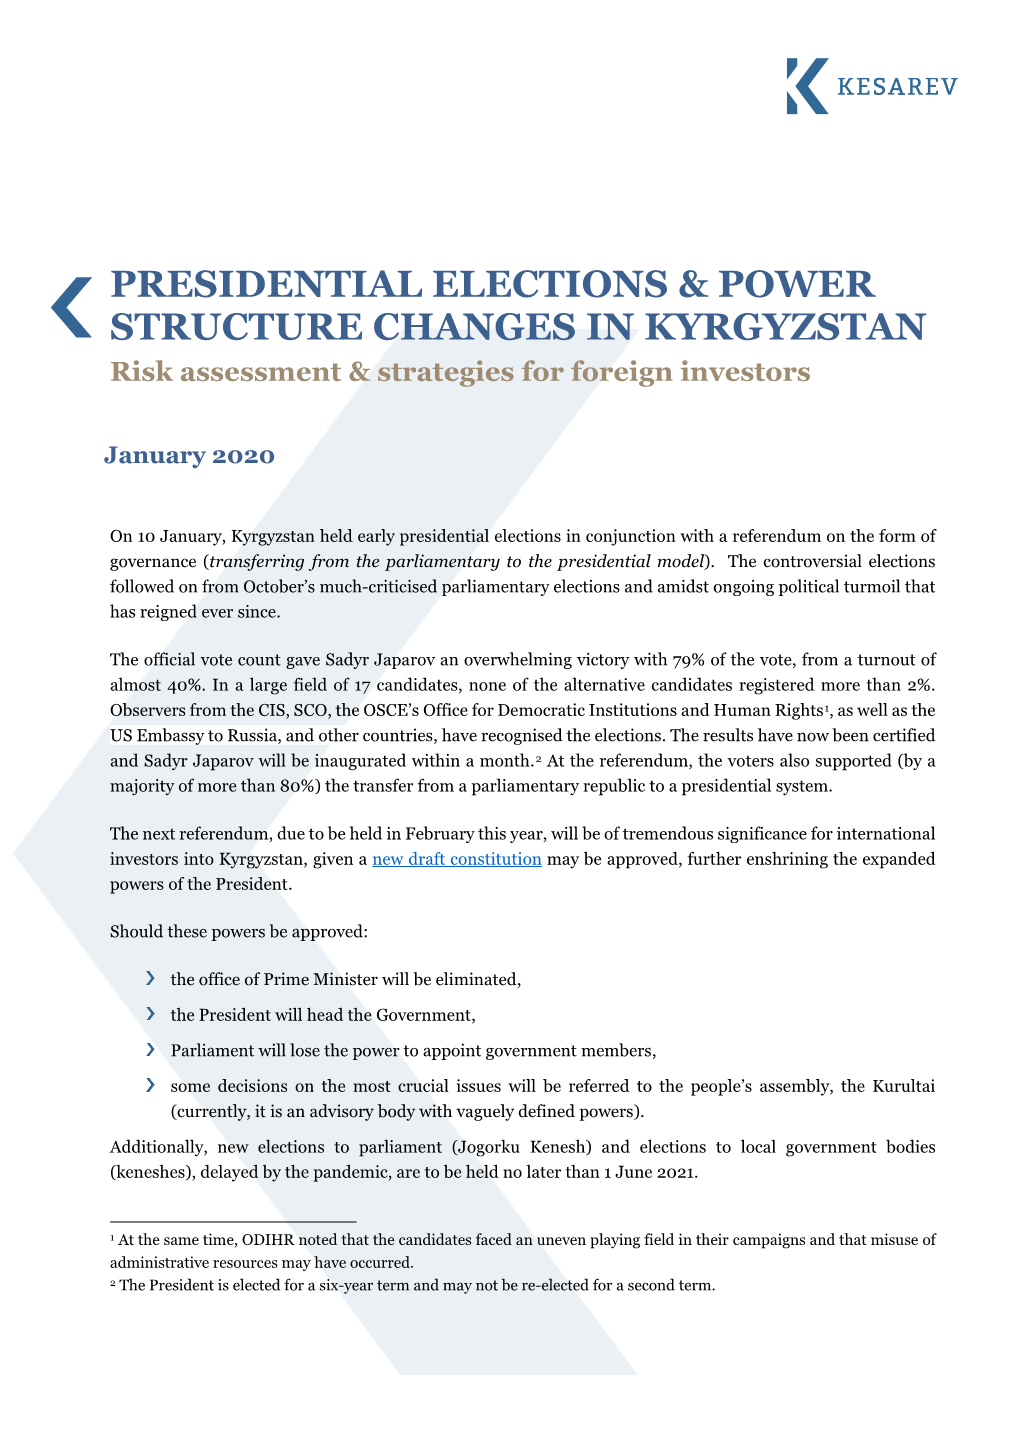 Kesarev | Presidential Elections & Power Structure Changes In